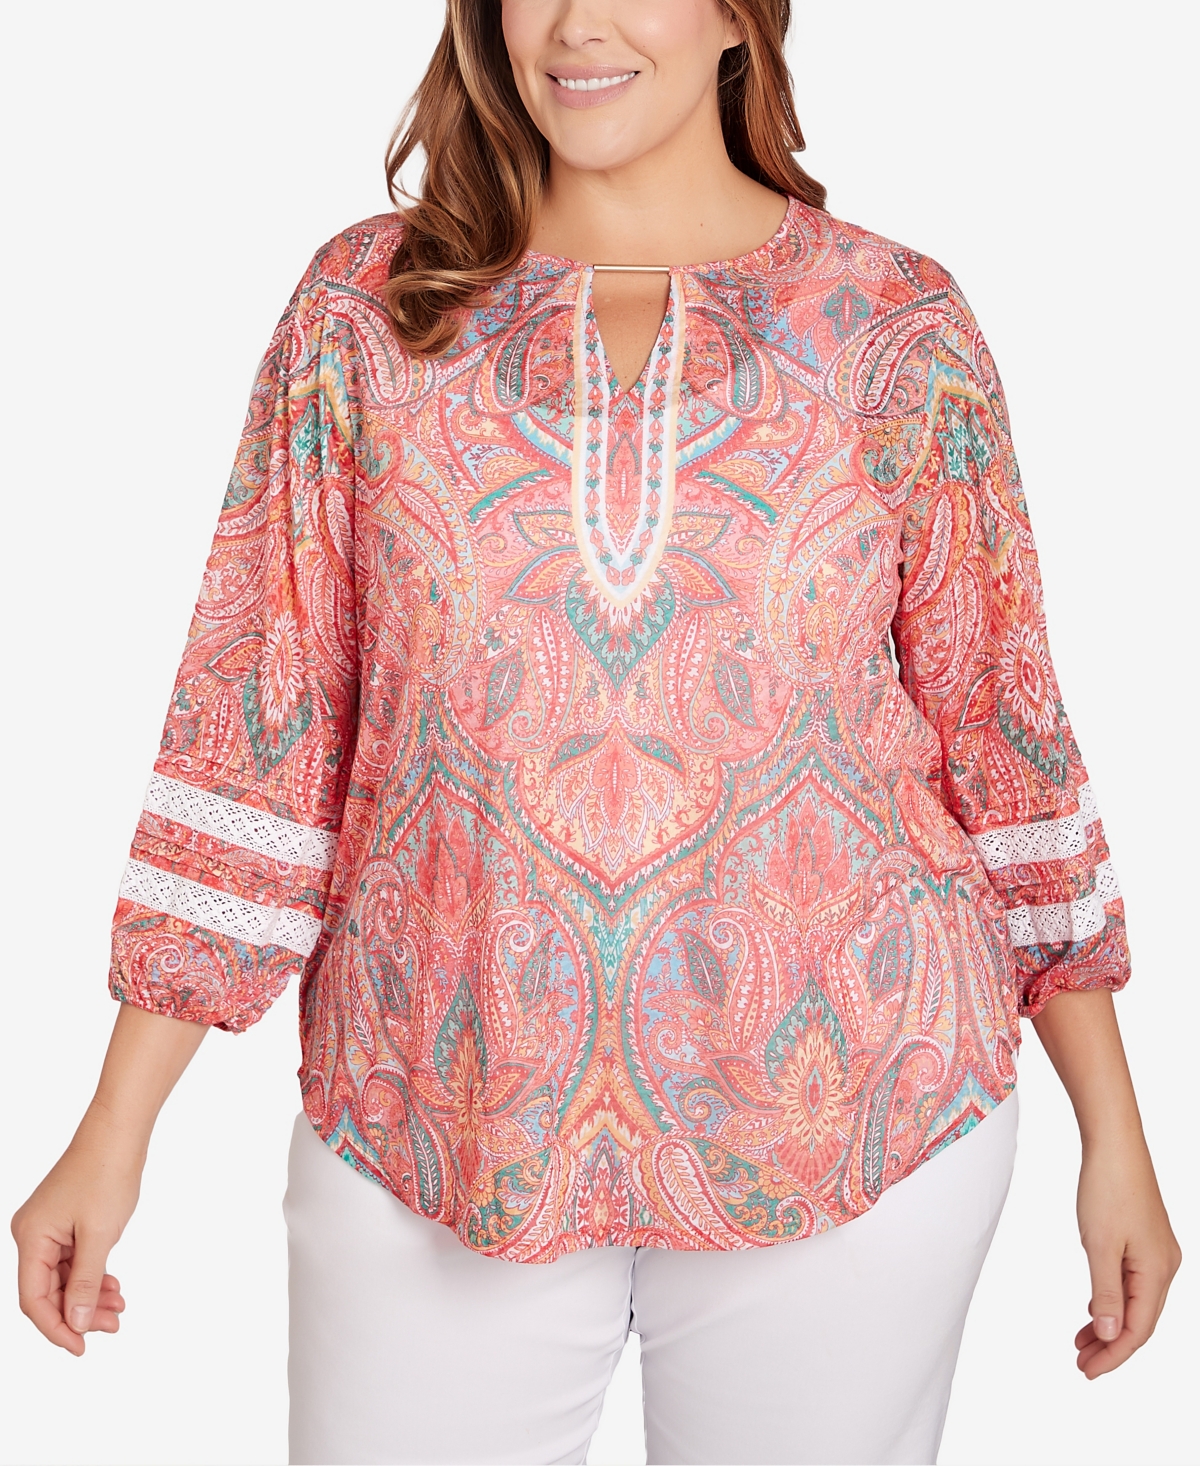 Ruby Rd. Plus Size Paisley Lace Knit Top In Pink